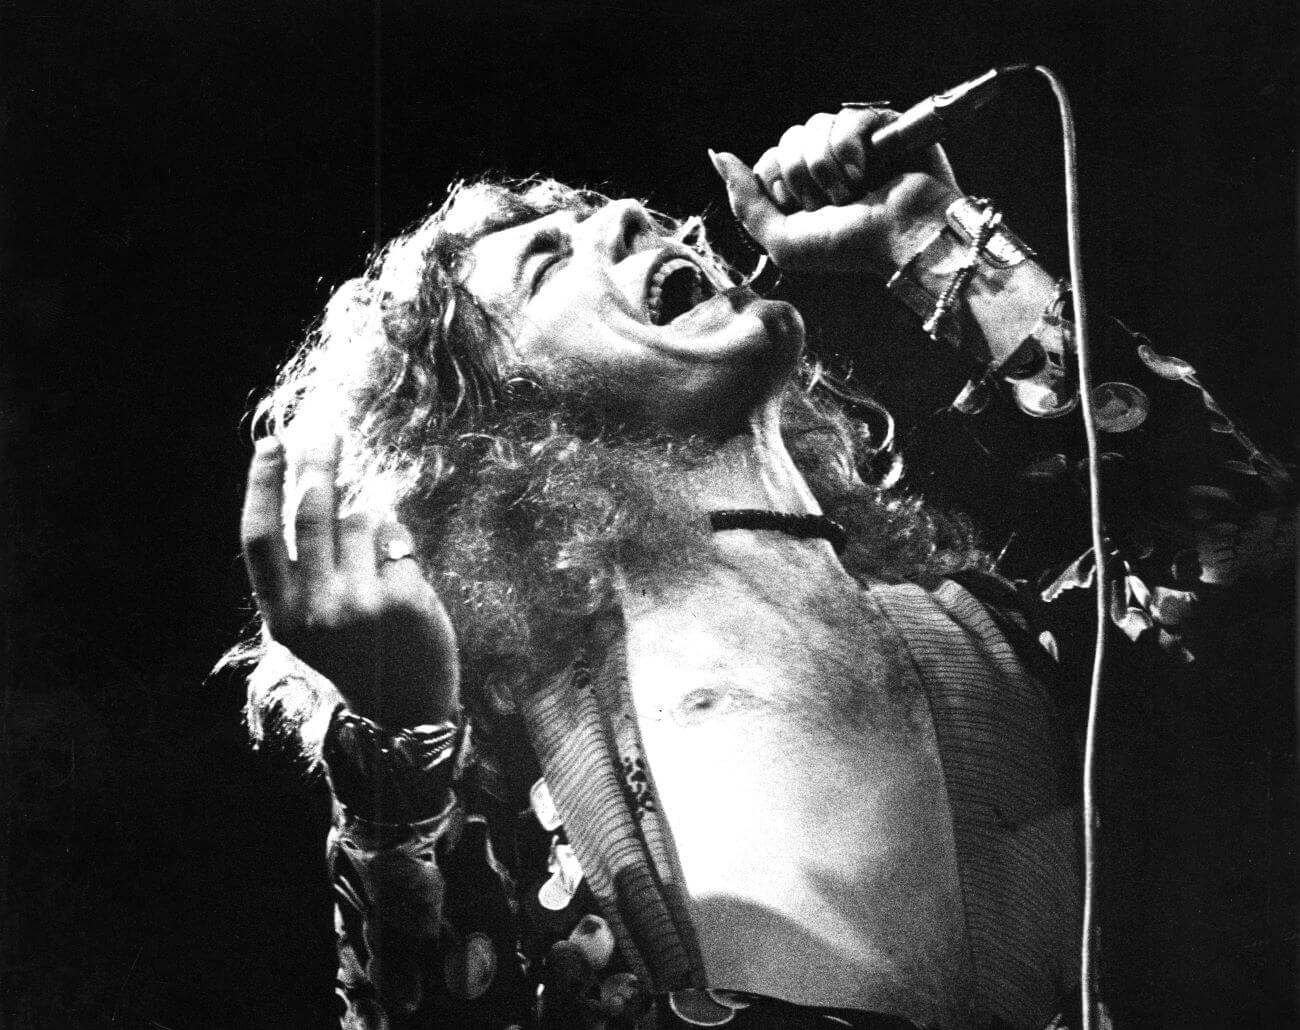 A black and white picture of Robert Plant leaning backward and singing into a microphone.